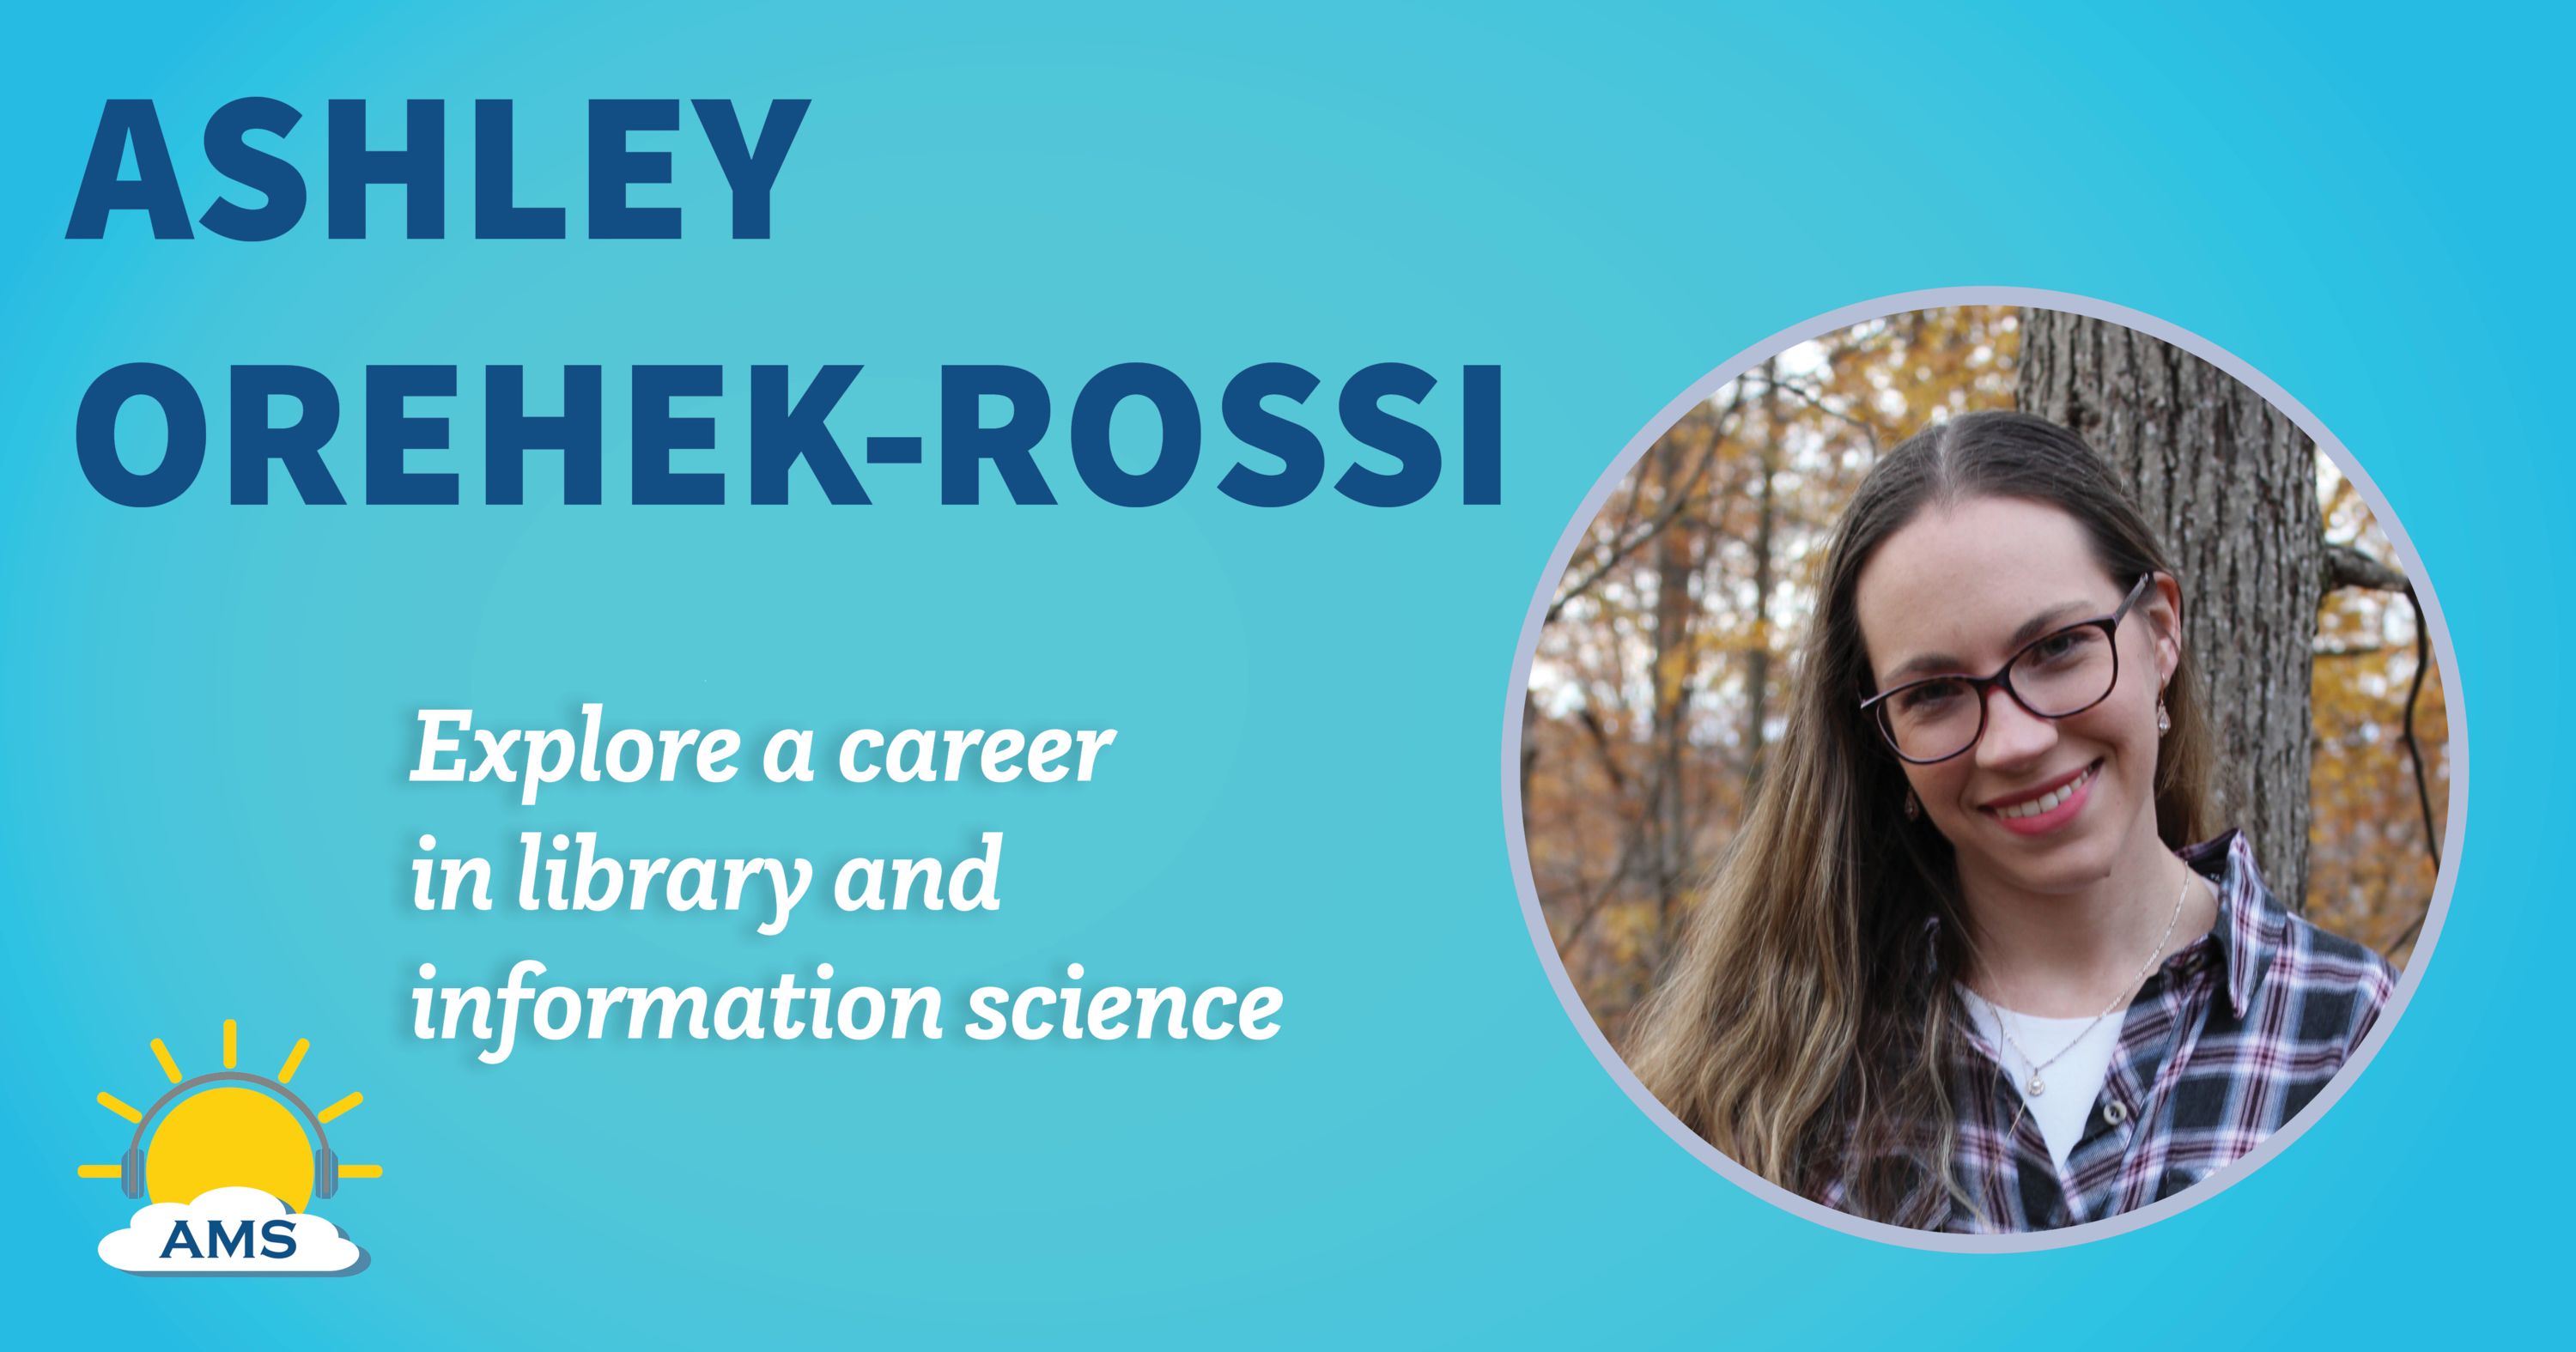 Ashley Orehek-Rossi headshot graphic with teaser text that reads "explore a career in climate research "